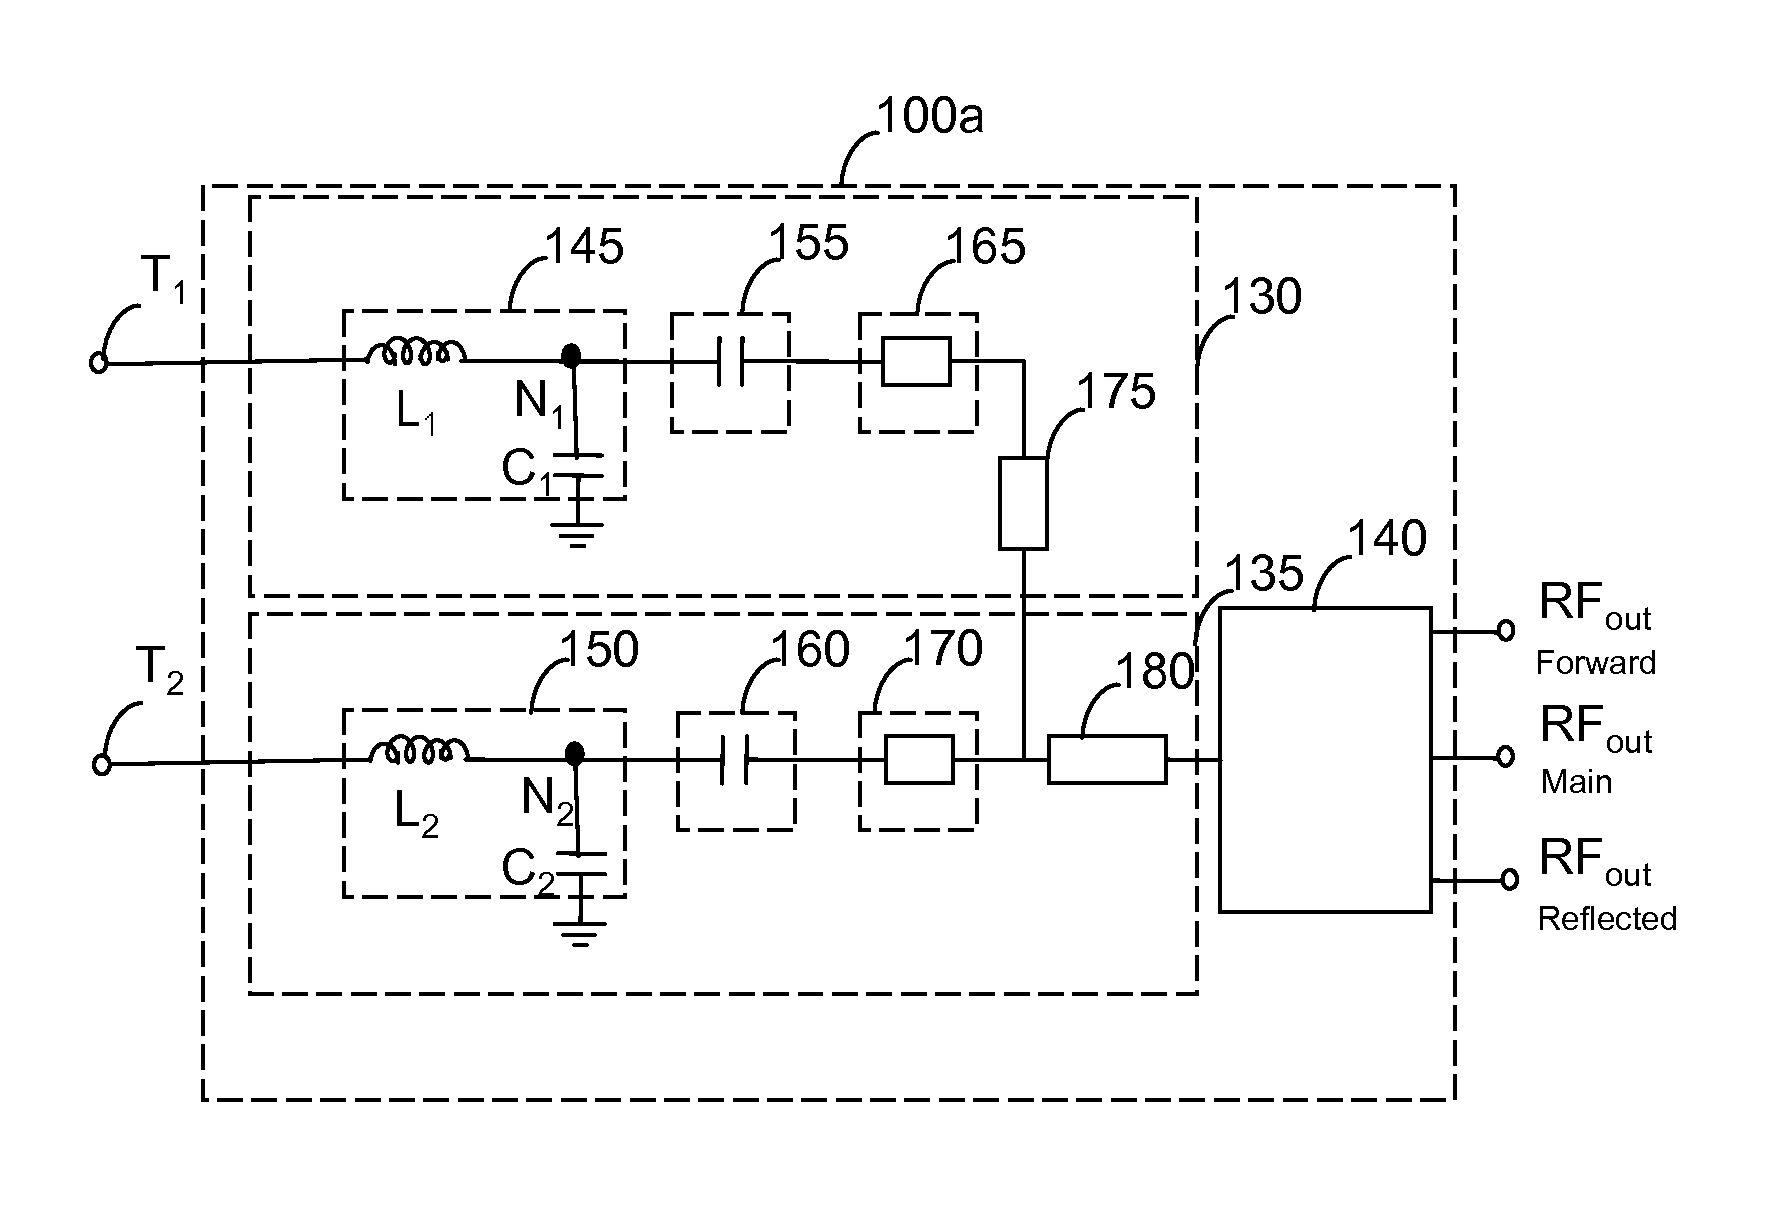 Integrated output combiner for amplifier system